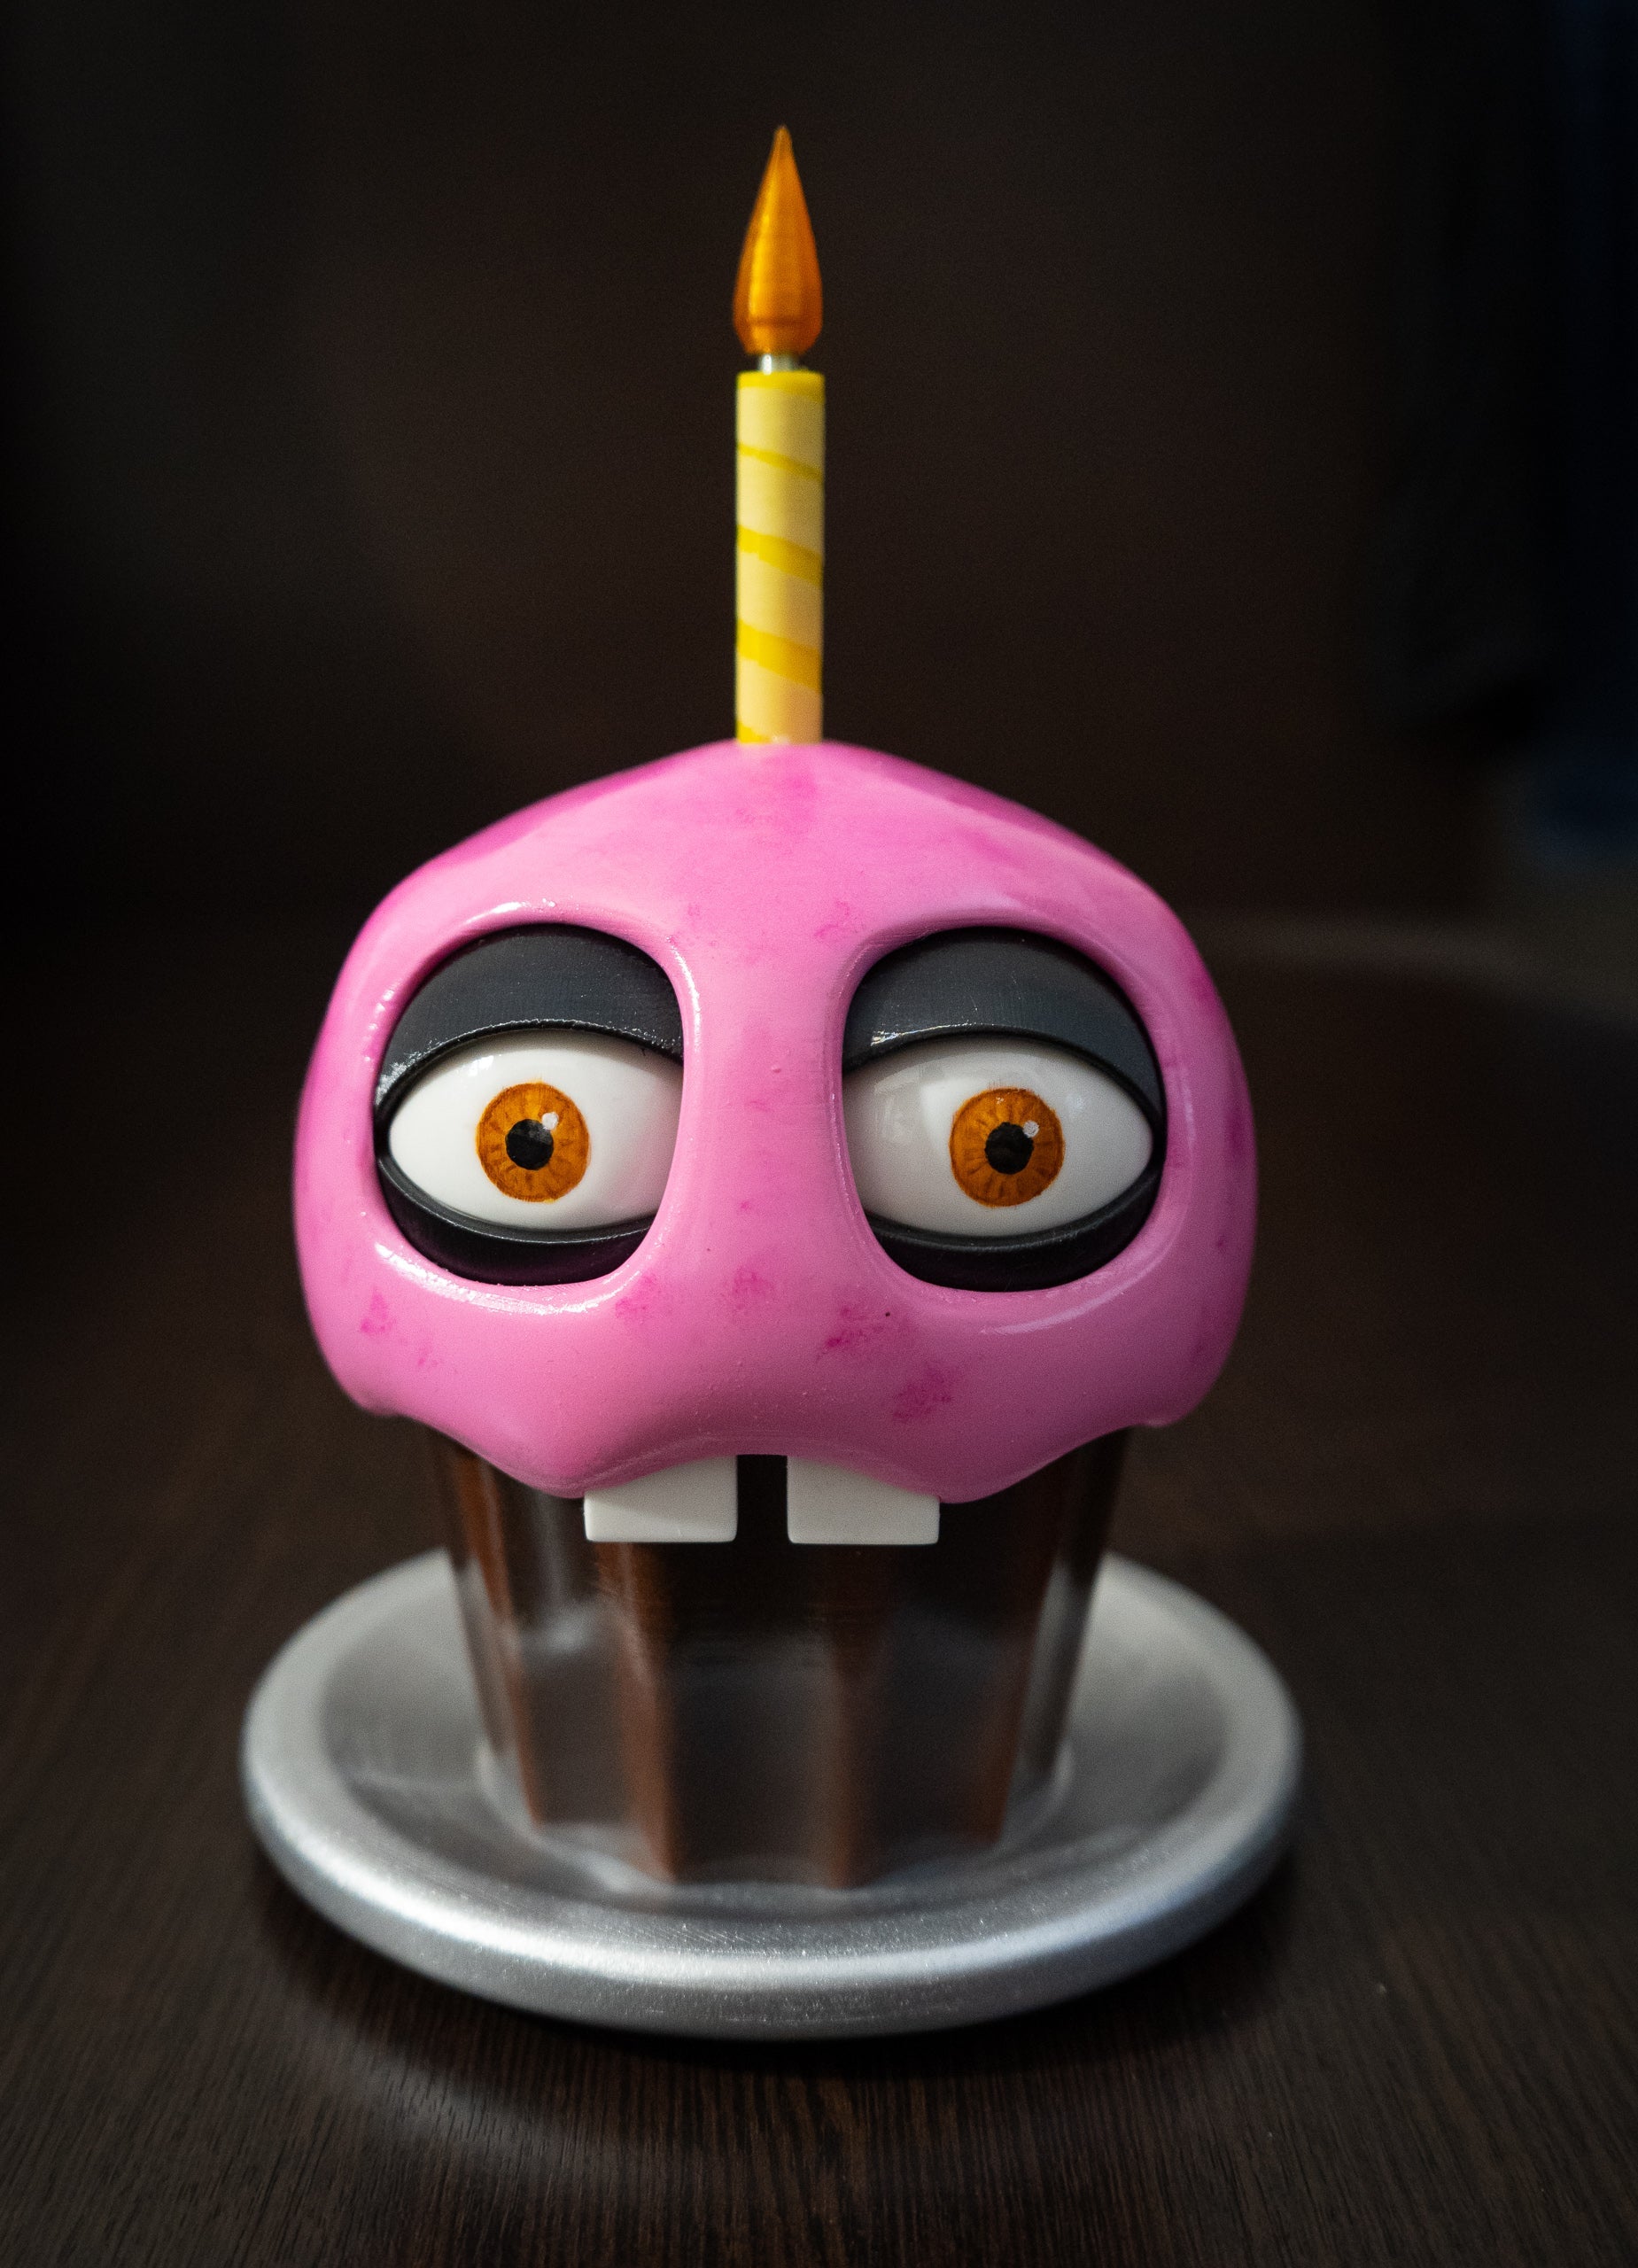 Mr. Cupcake animatronic from the Five Nights at Freddy's (FNAF